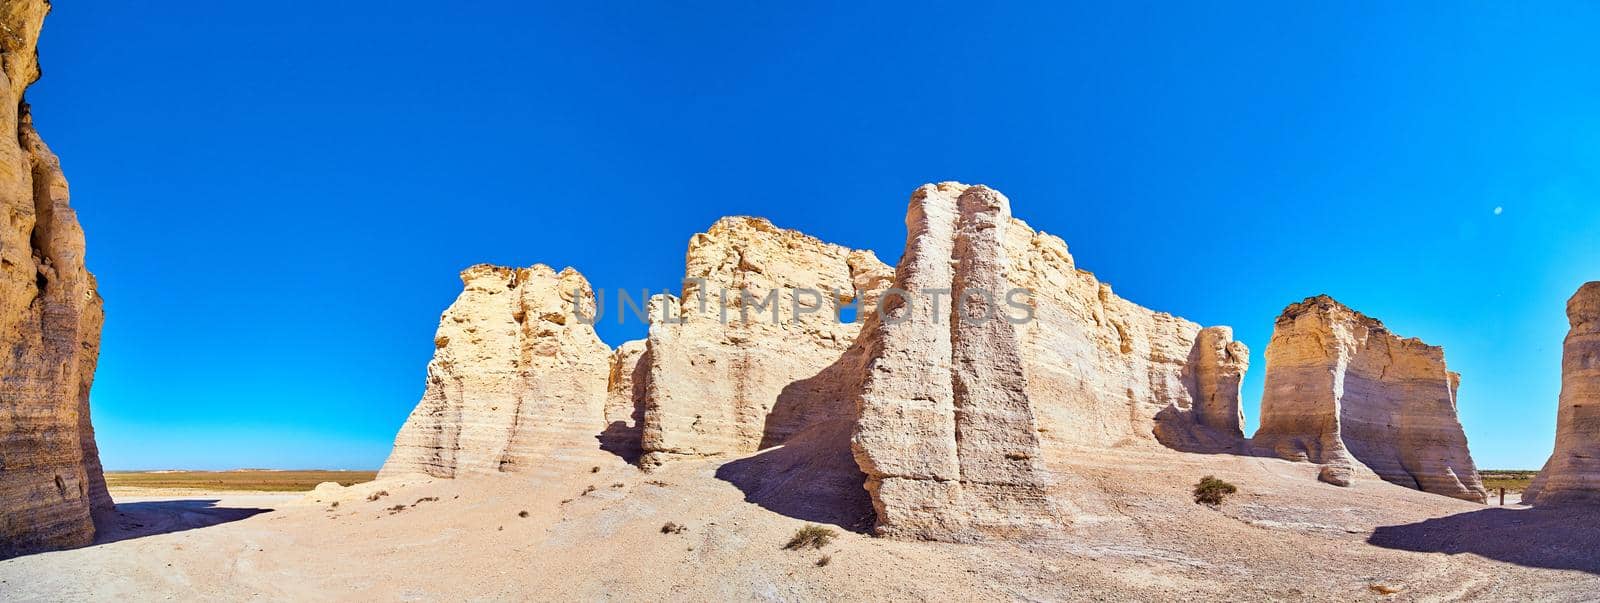 Panorama of white and beige vertical rock monuments against blue sky by njproductions